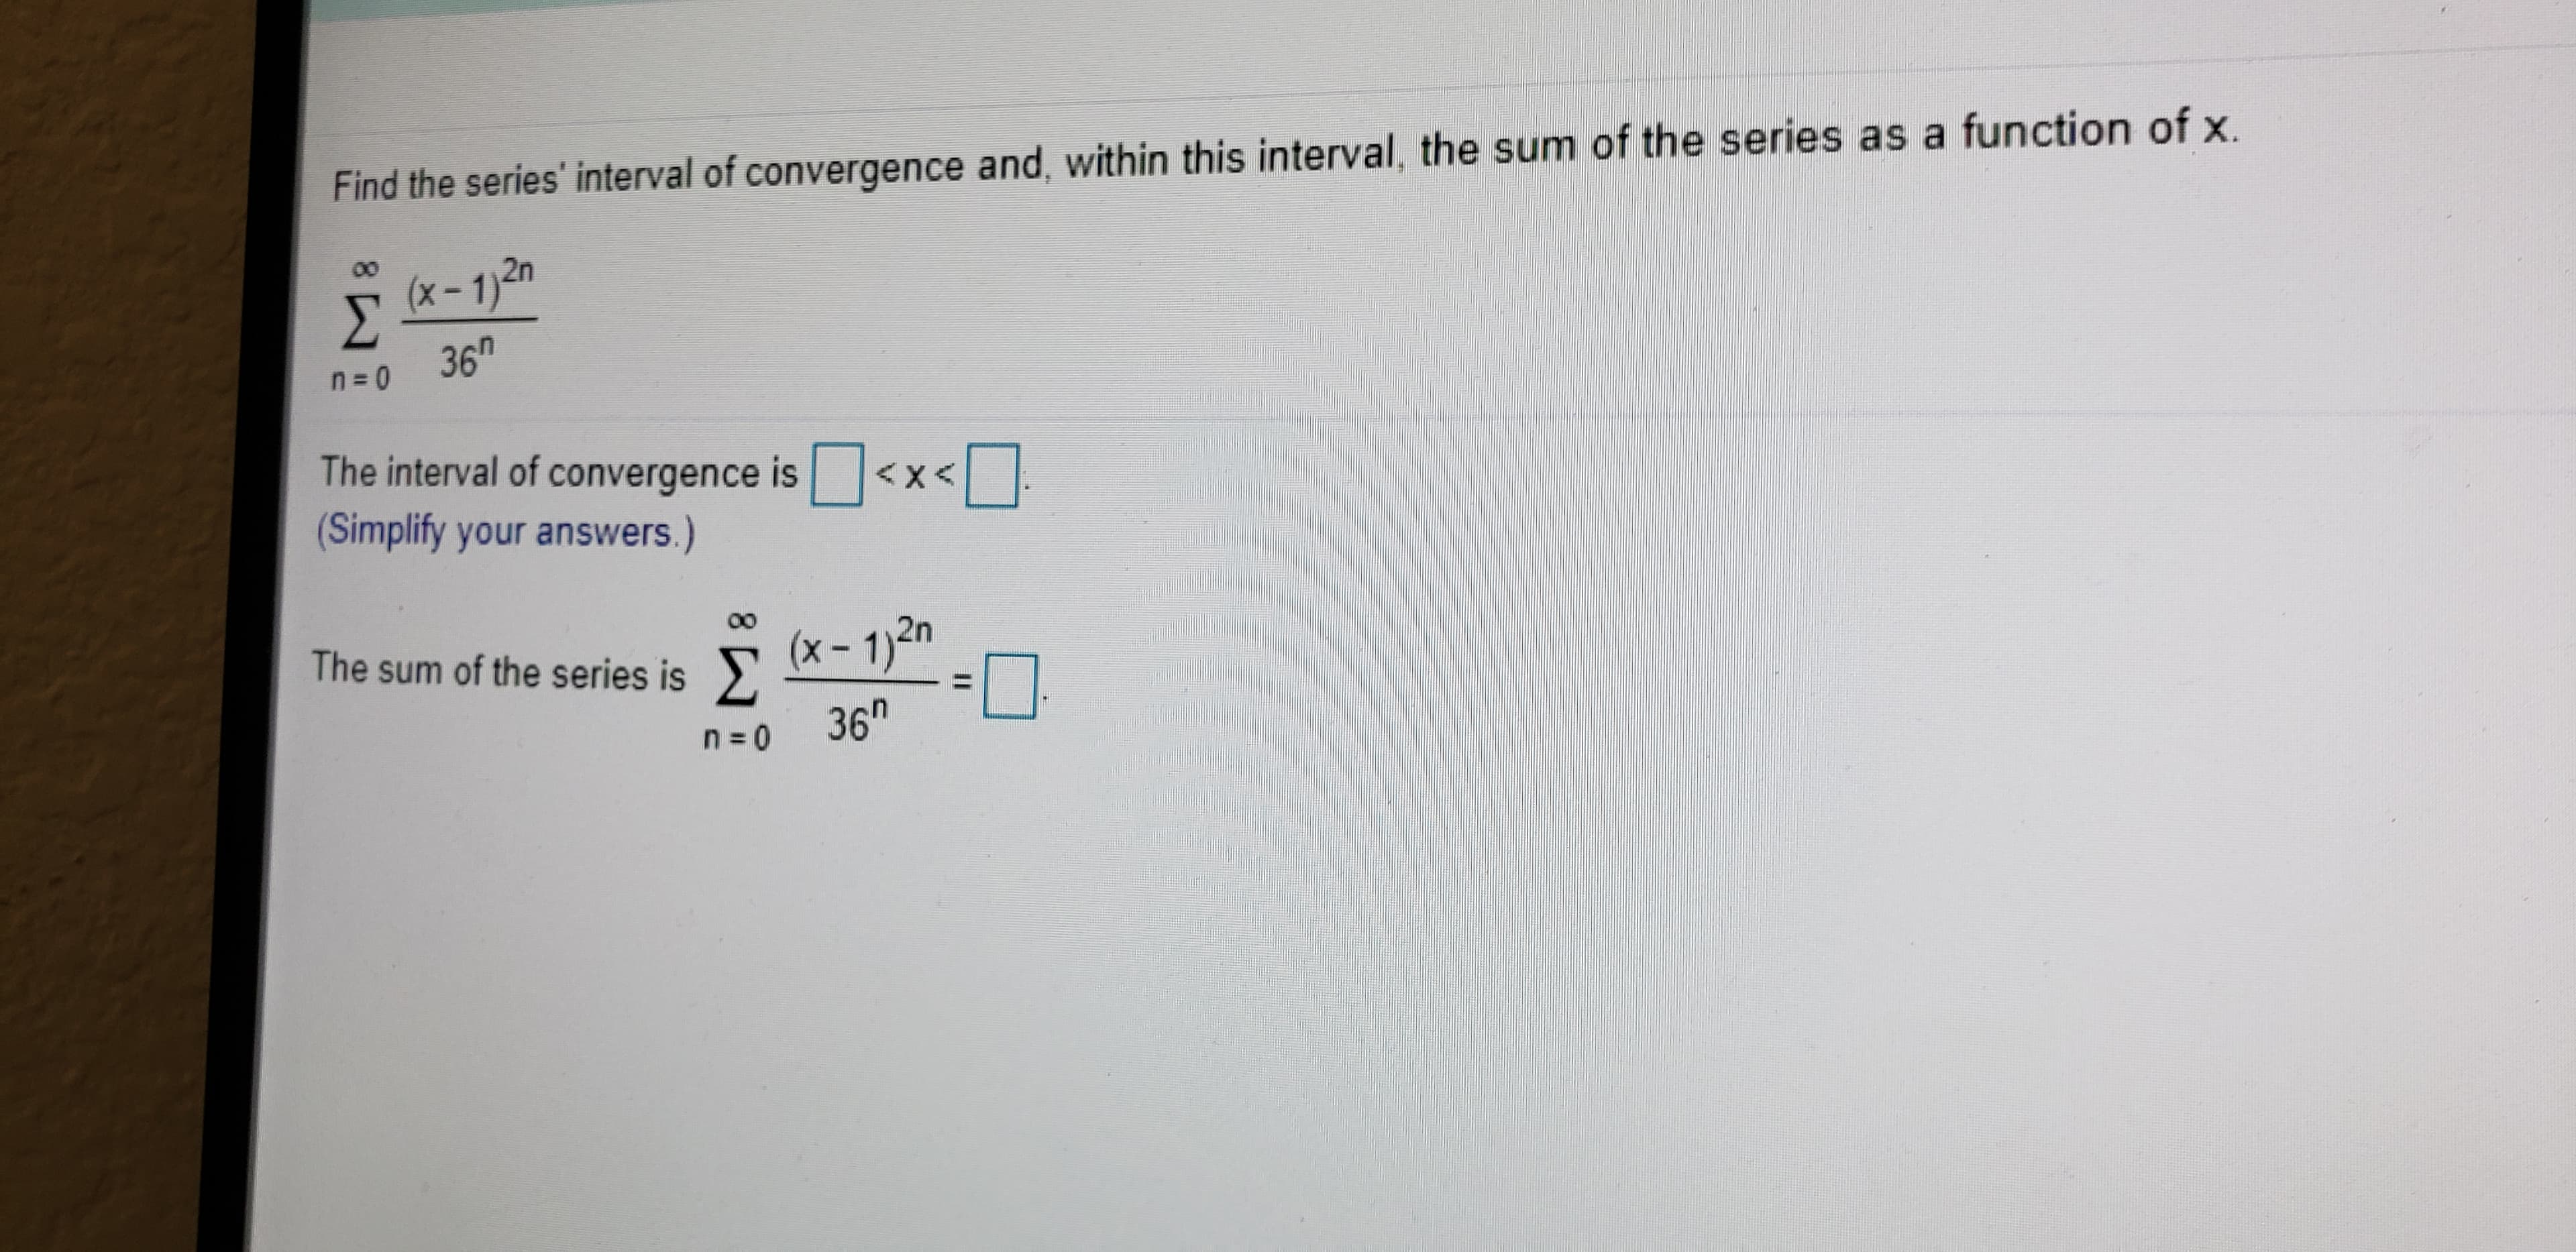 Find the series' interval of convergence and, within this interval, the sum of the series as a function of x.
(x-1)2n
Σ
36h
n = 0
The interval of convergence is<x<
Simplify your answers.)
The sum of the series is >
(x- 1)2n
n = 0
36"
